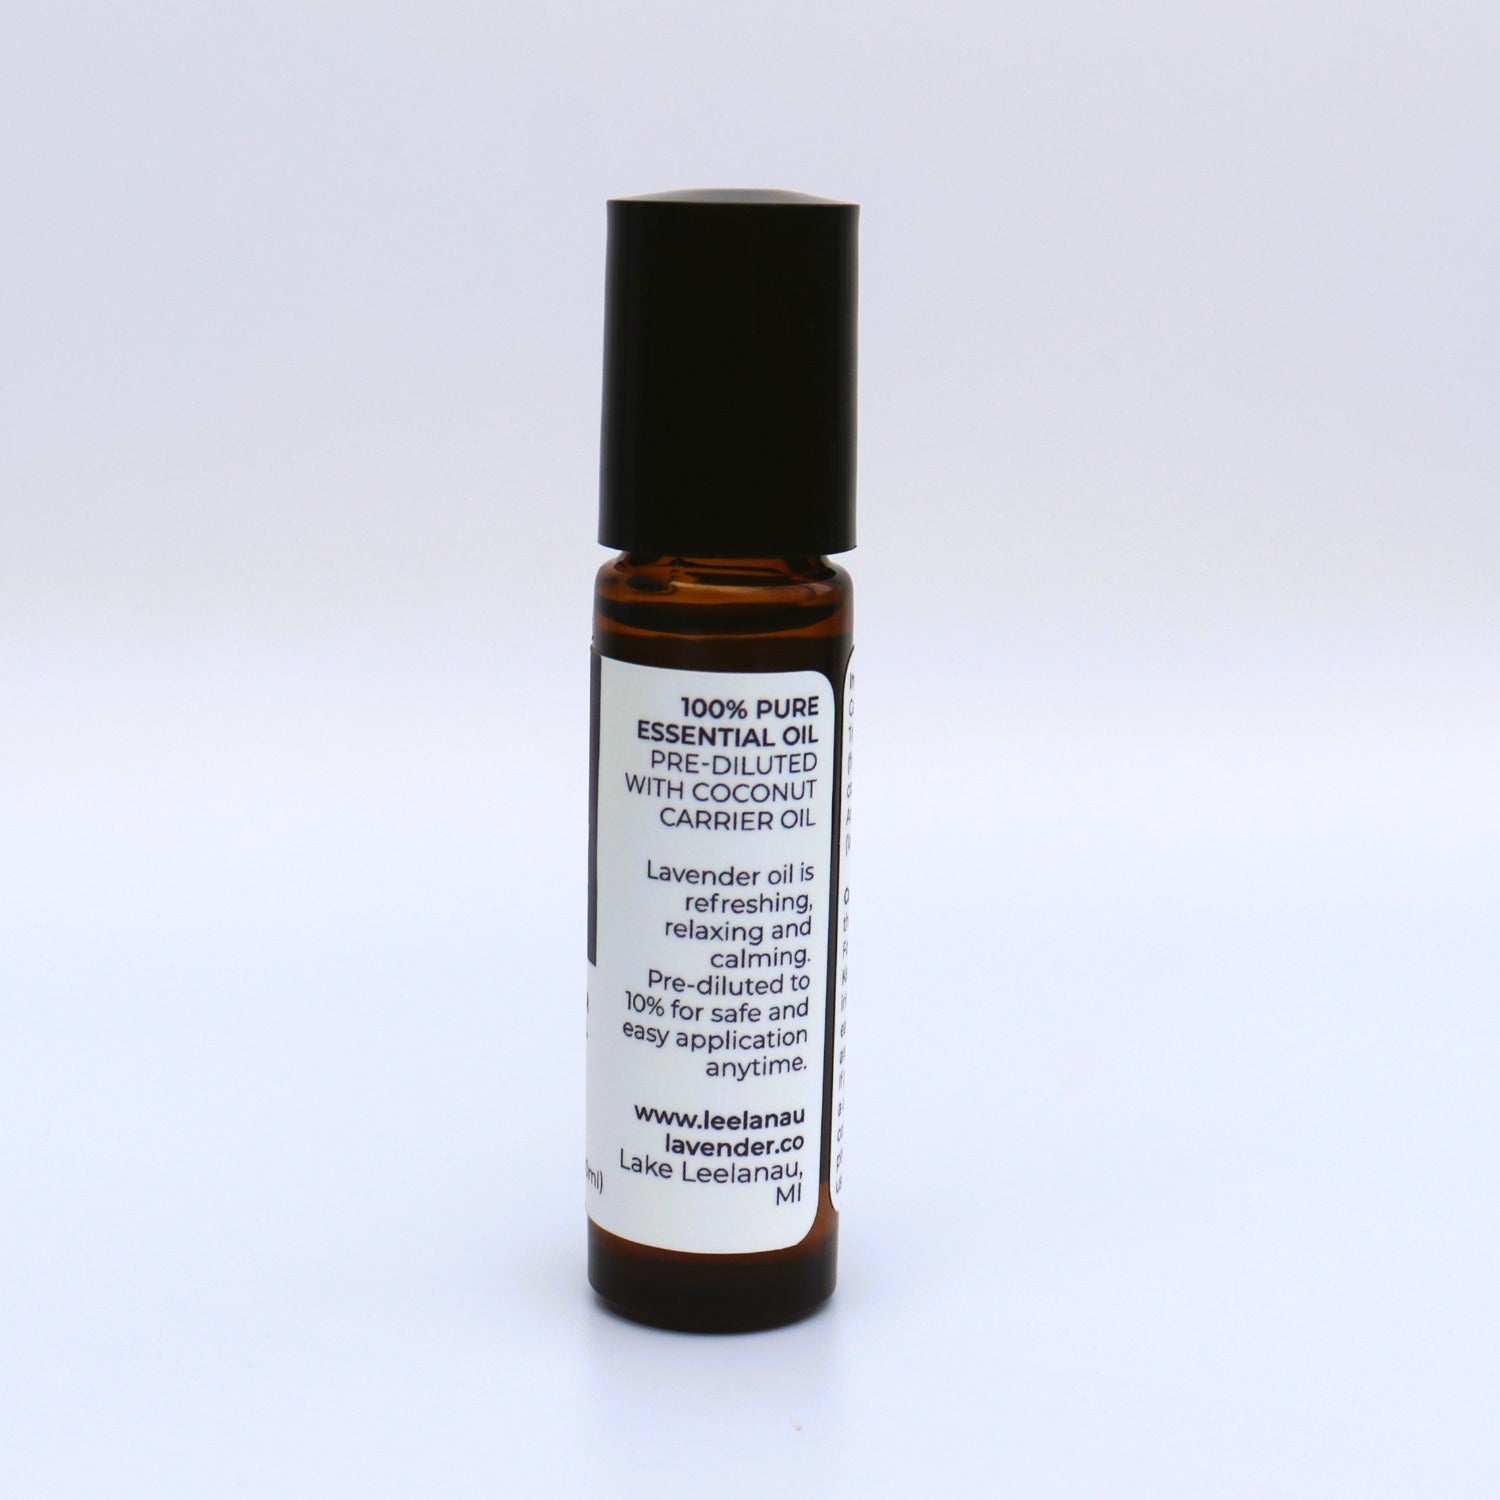 Roll-On Lavender Essential Oil